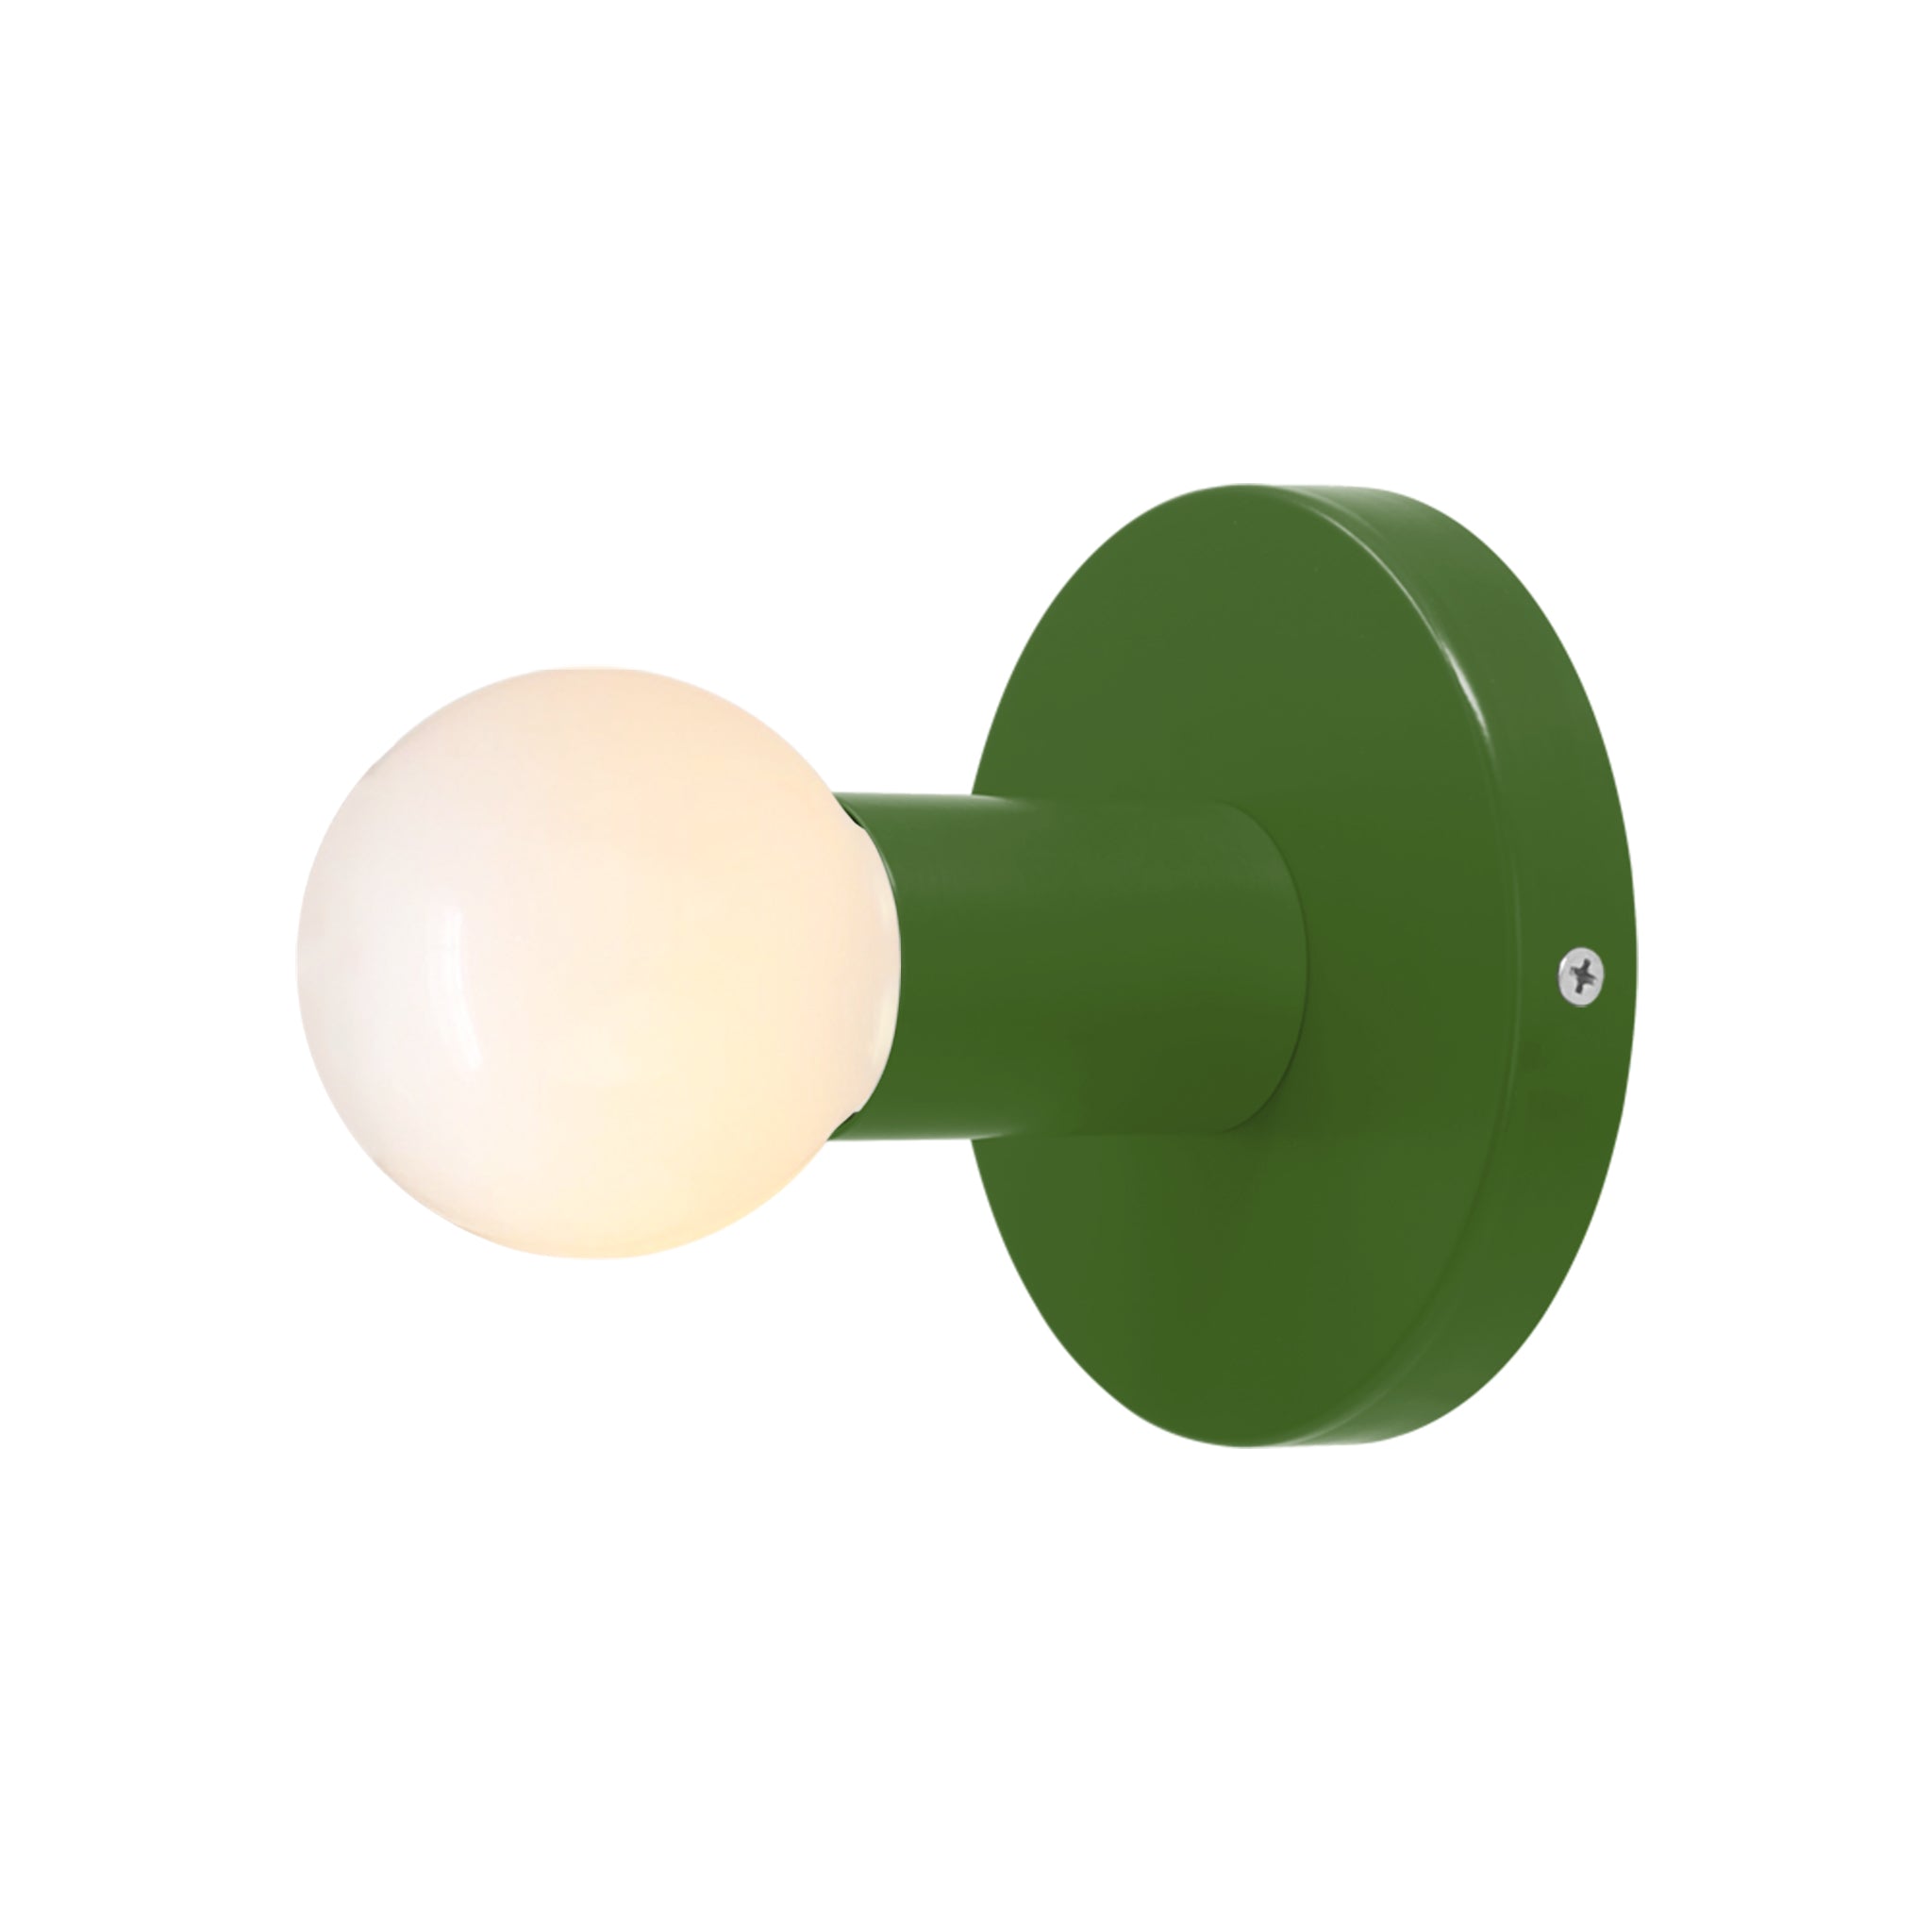 Nickel and lagoon color Twink sconce Dutton Brown lighting